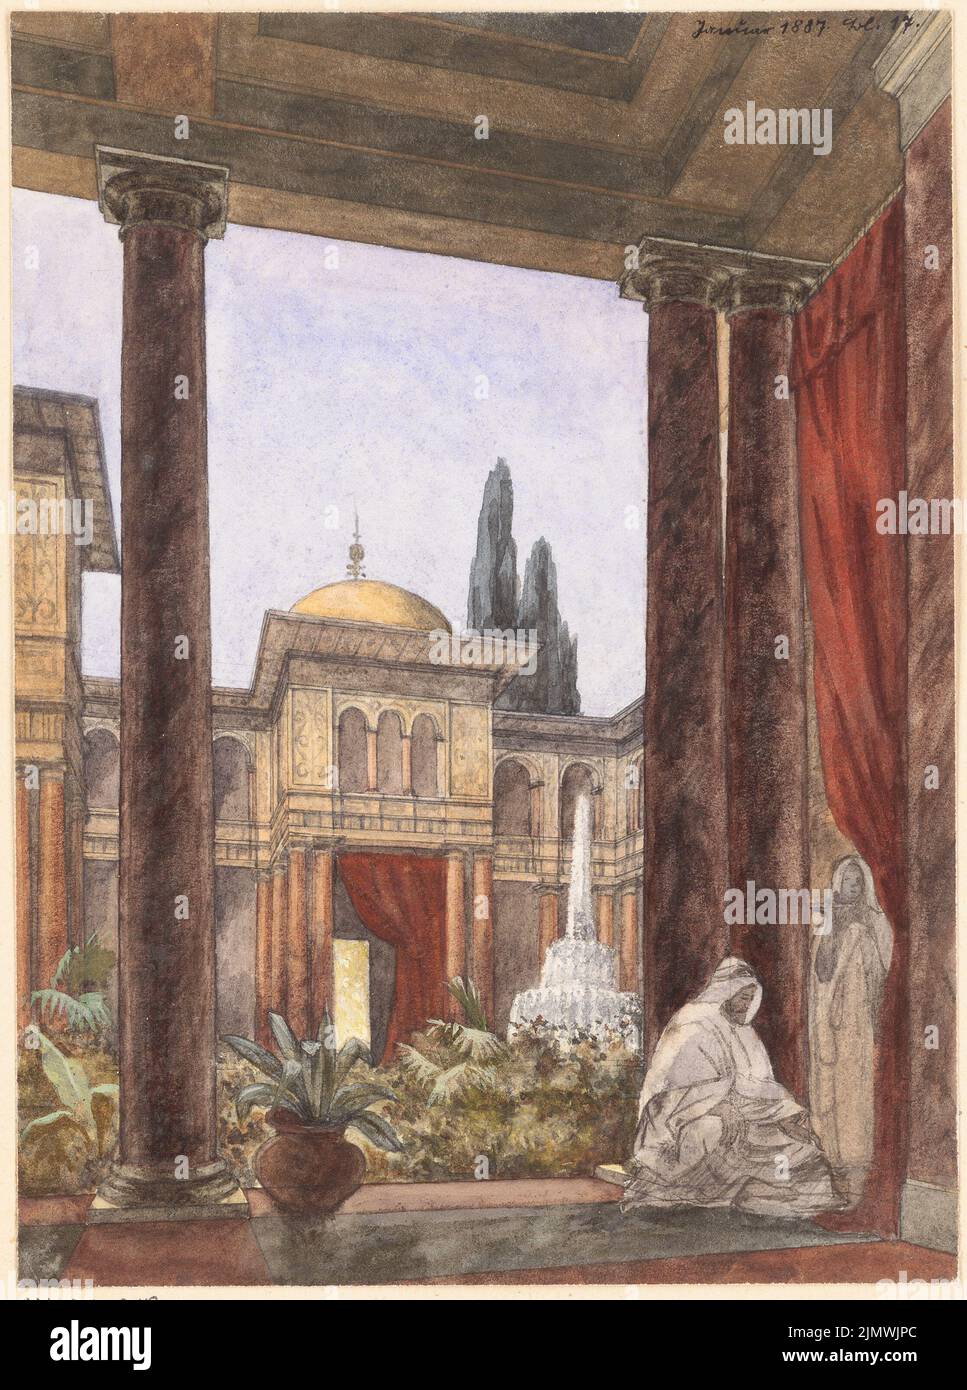 Unknown architect, consulate building in an Arab country. Monthly competition January 1887 (01.1887): Perspective view of the courtyard. Tusche watercolor on paper, 25.5 x 18.9 cm (including scan edges) N.N. : Konsulatsgebäude in einem arabischen Land. Monatskonkurrenz Januar 1887 Stock Photo